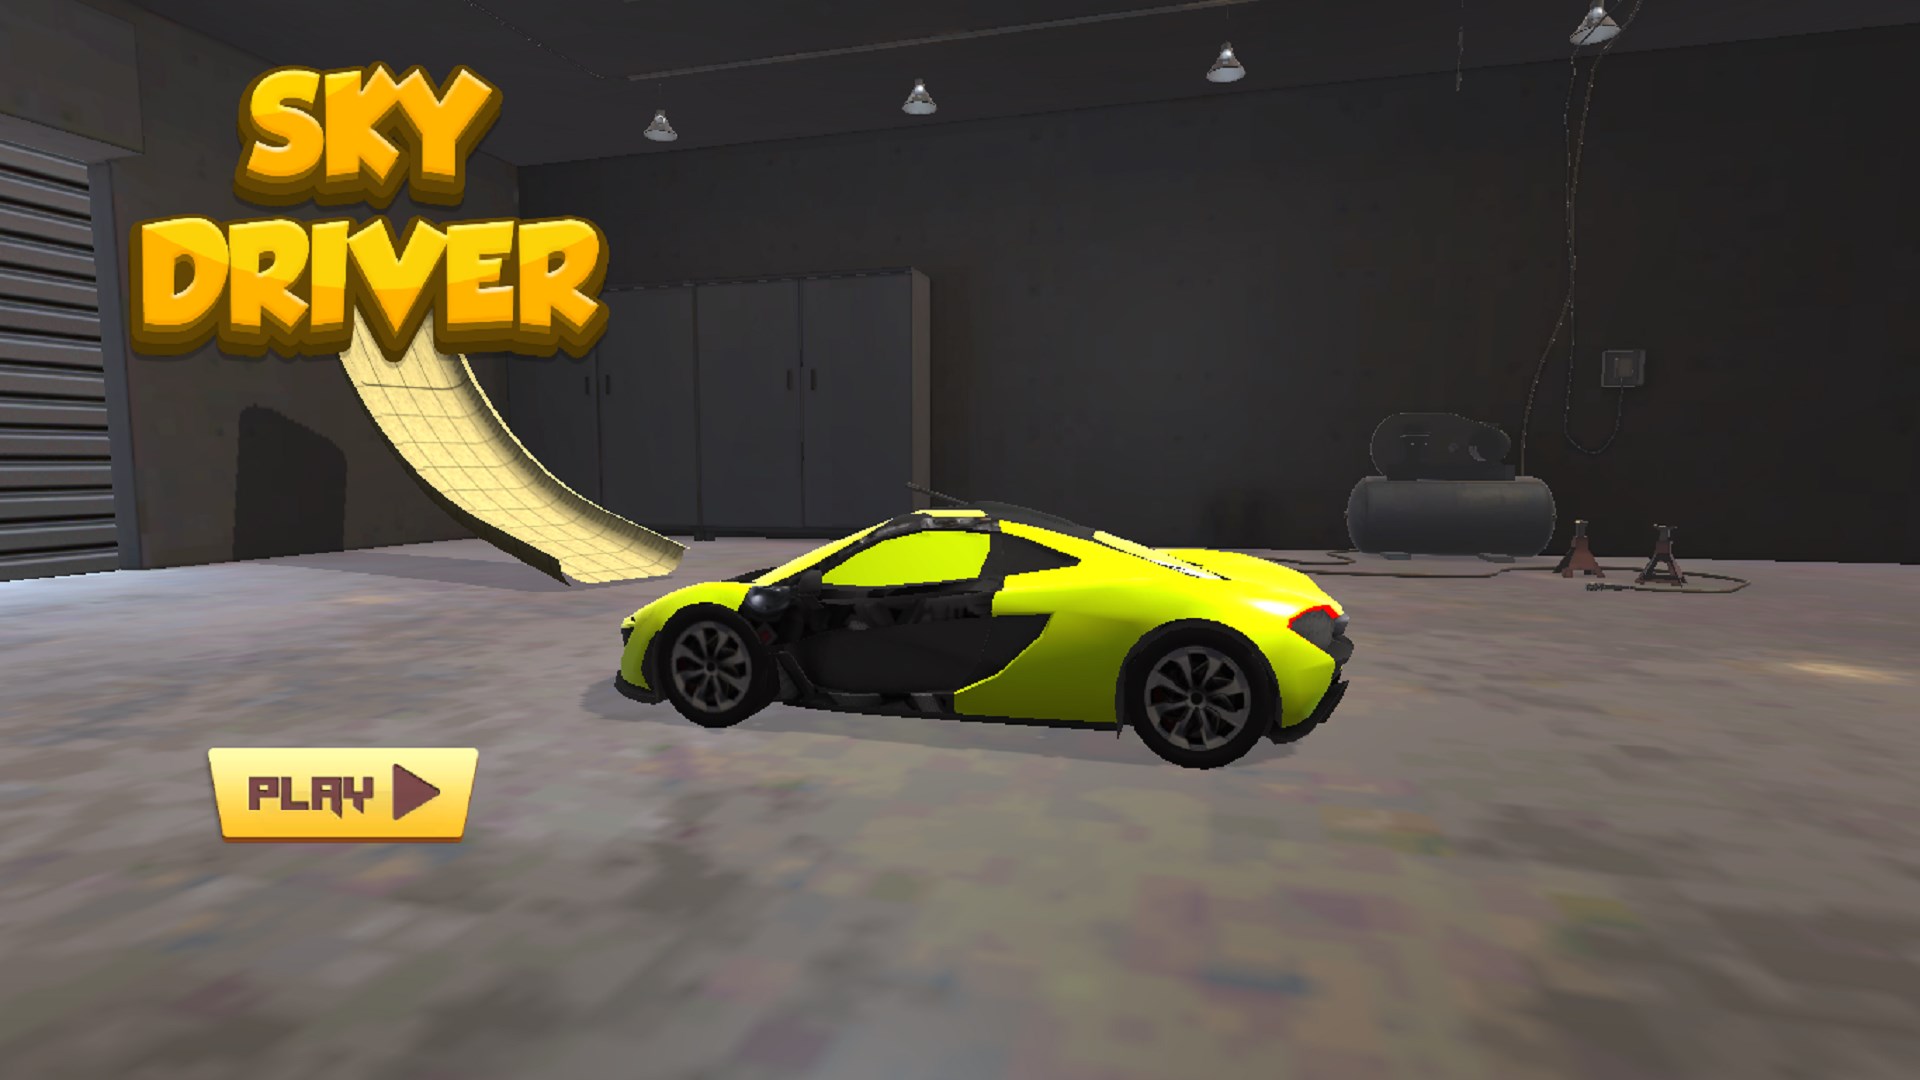 Fly Car Stunt - Online Game - Play for Free